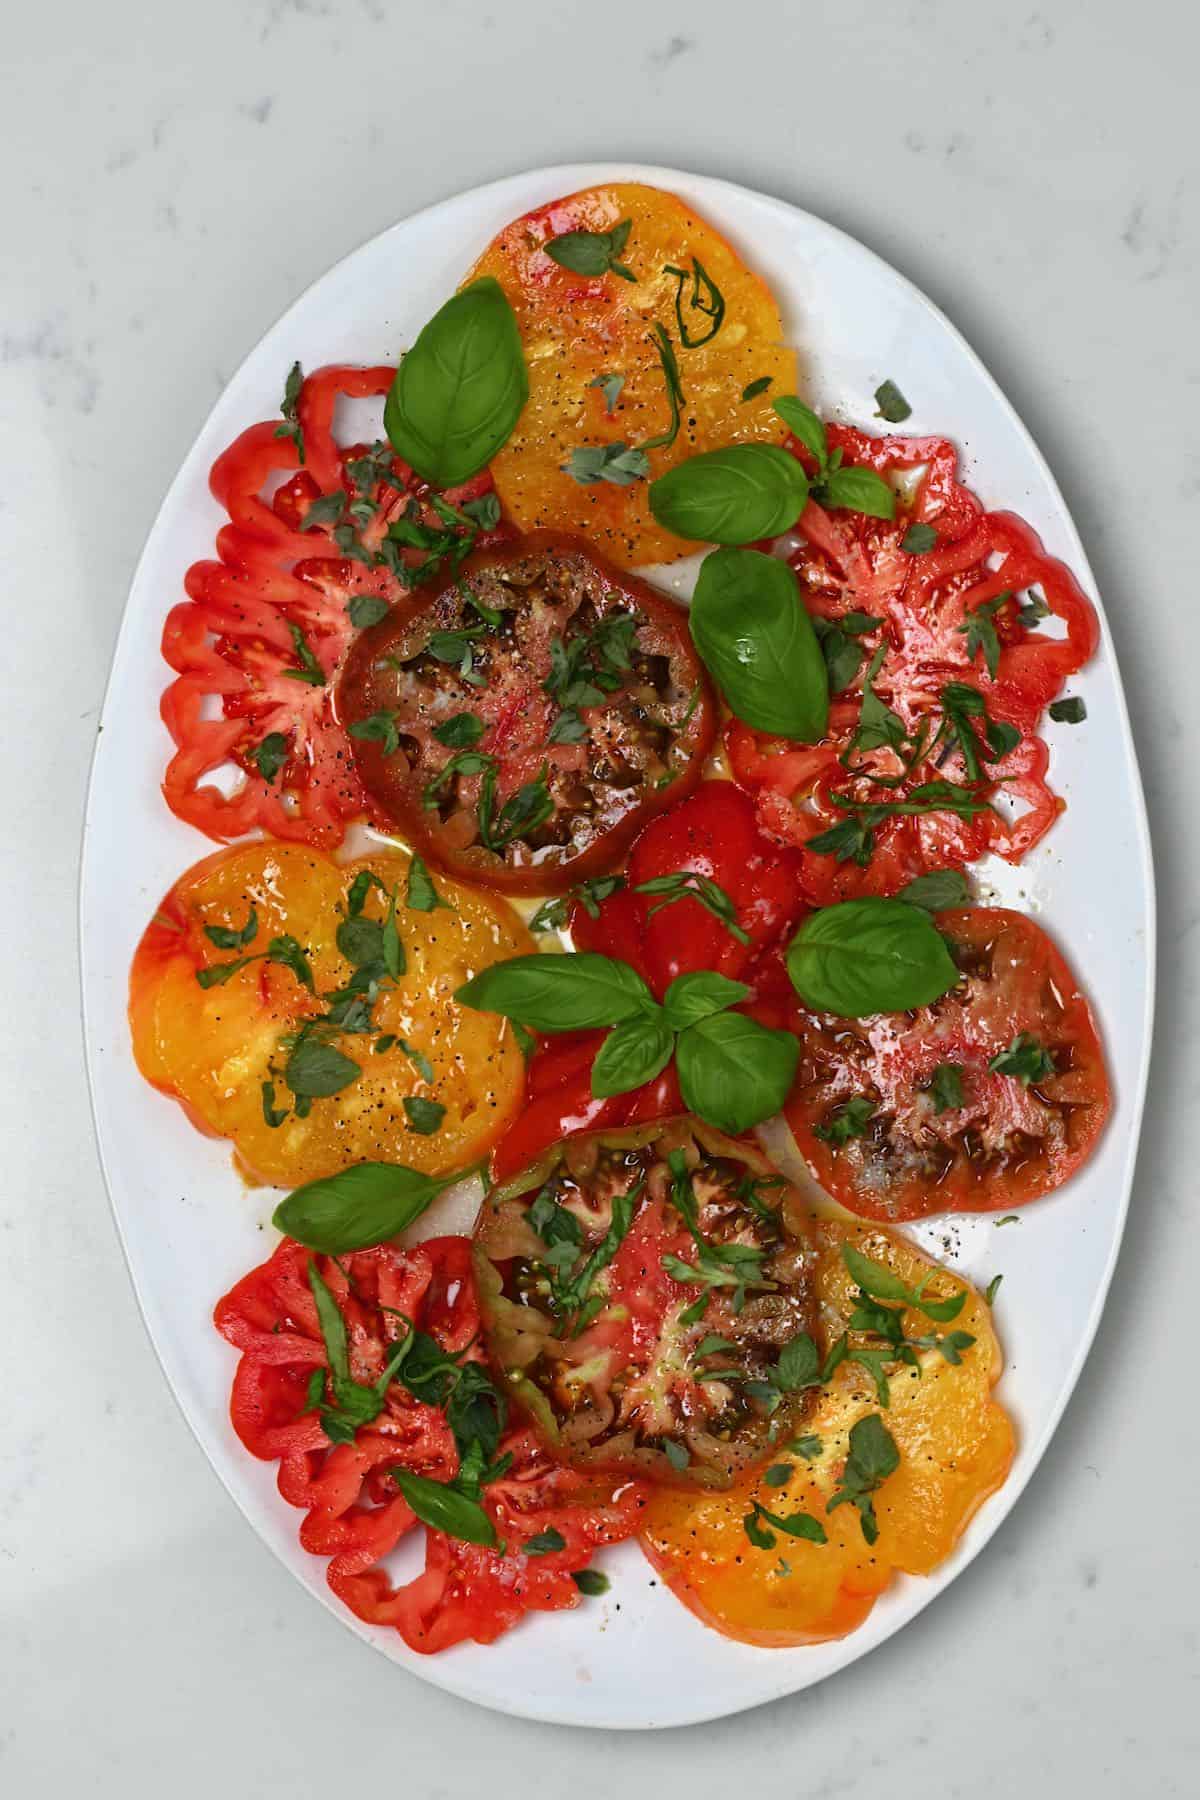 Tomato salad topped with basil